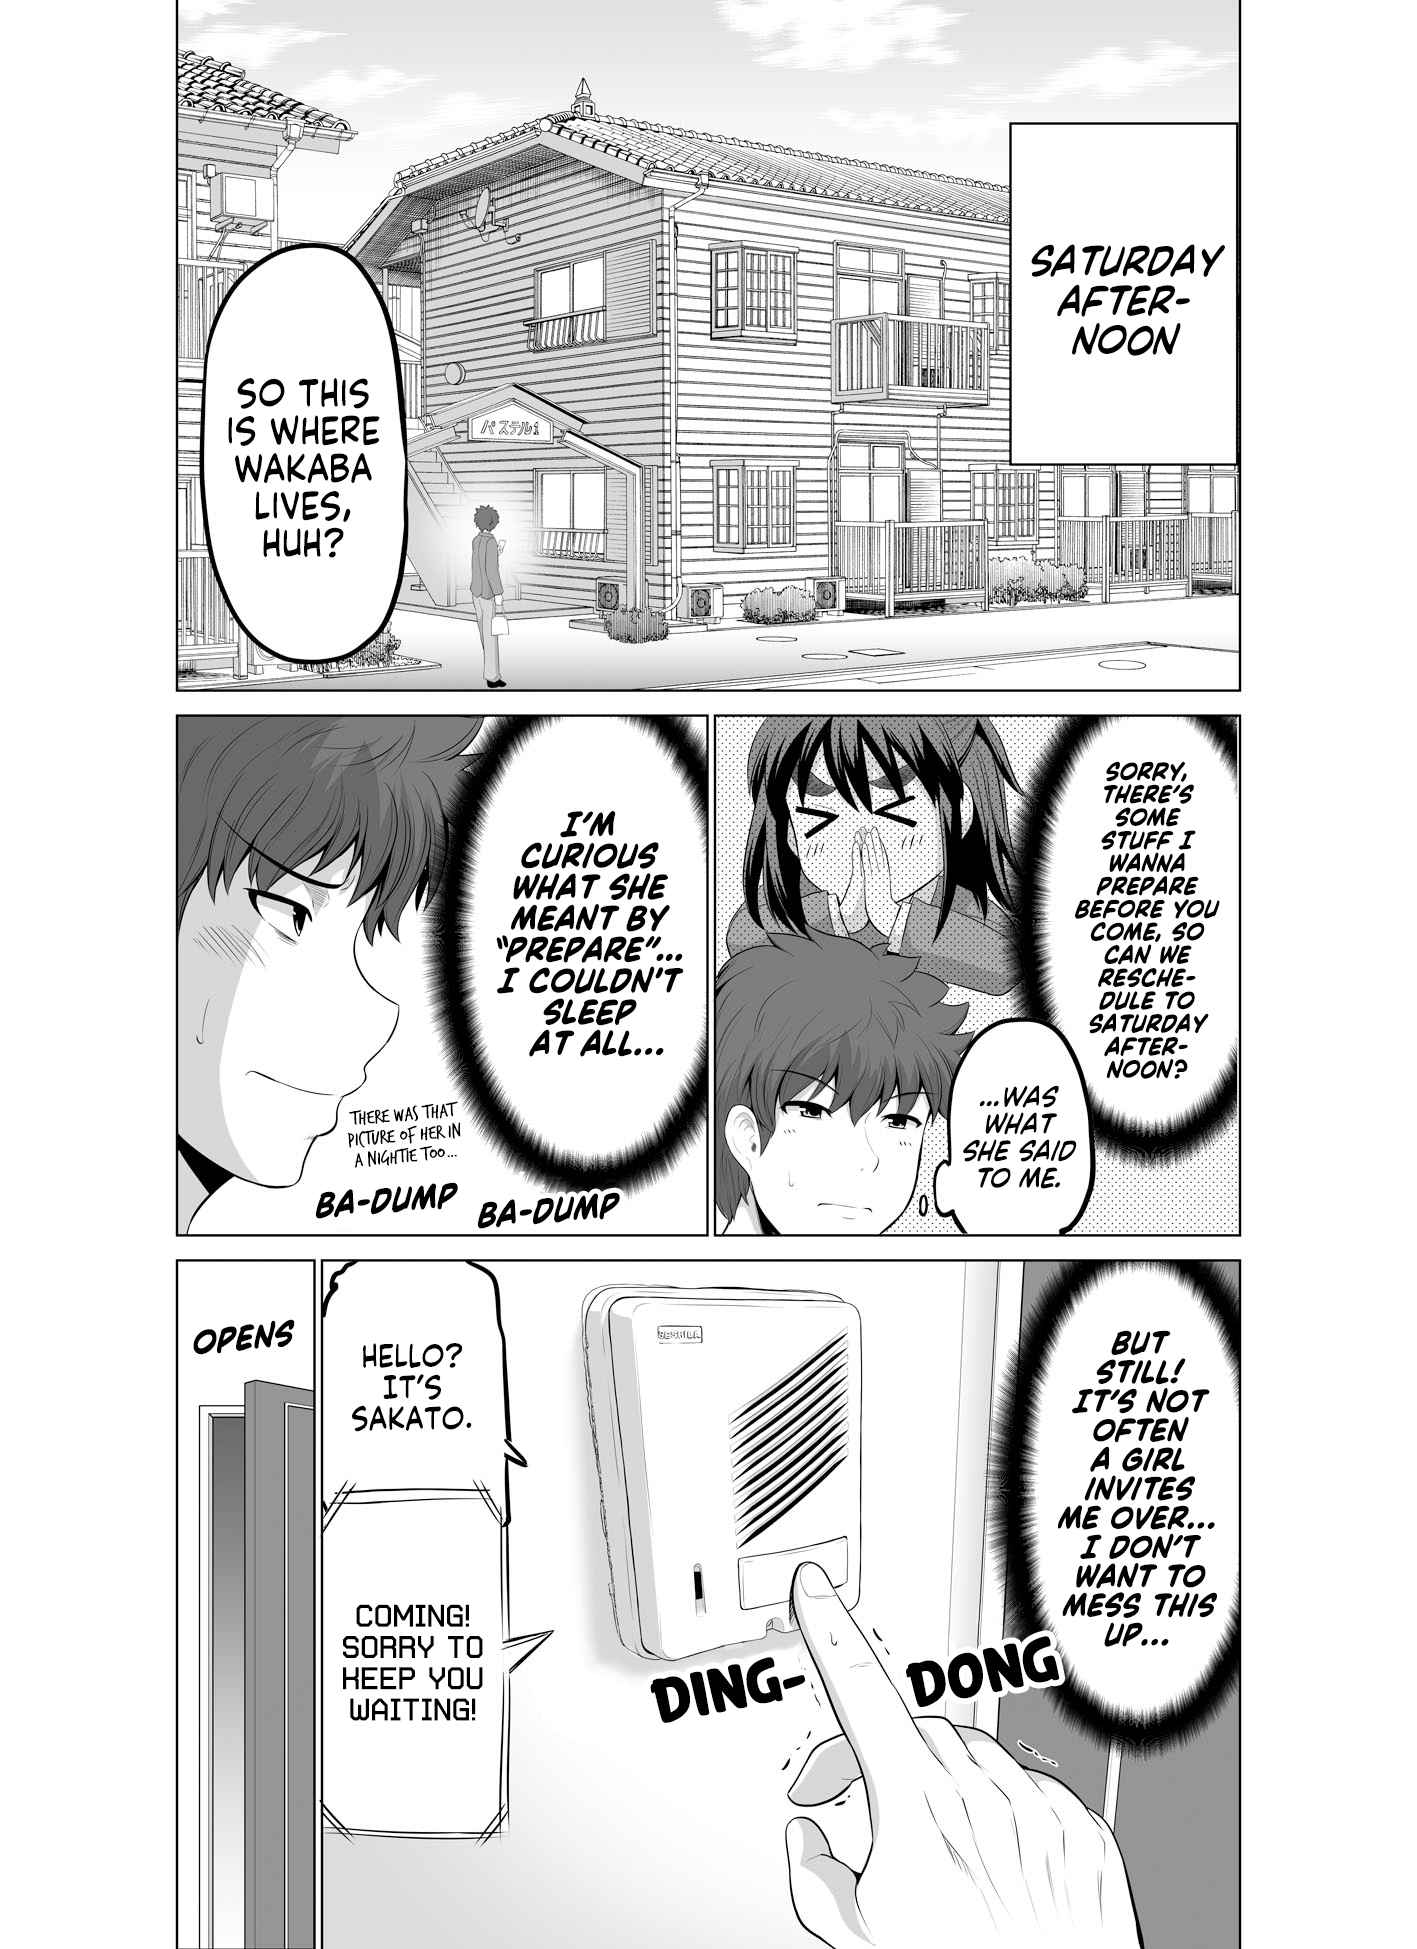 From Misunderstandings To Marriage - Page 1